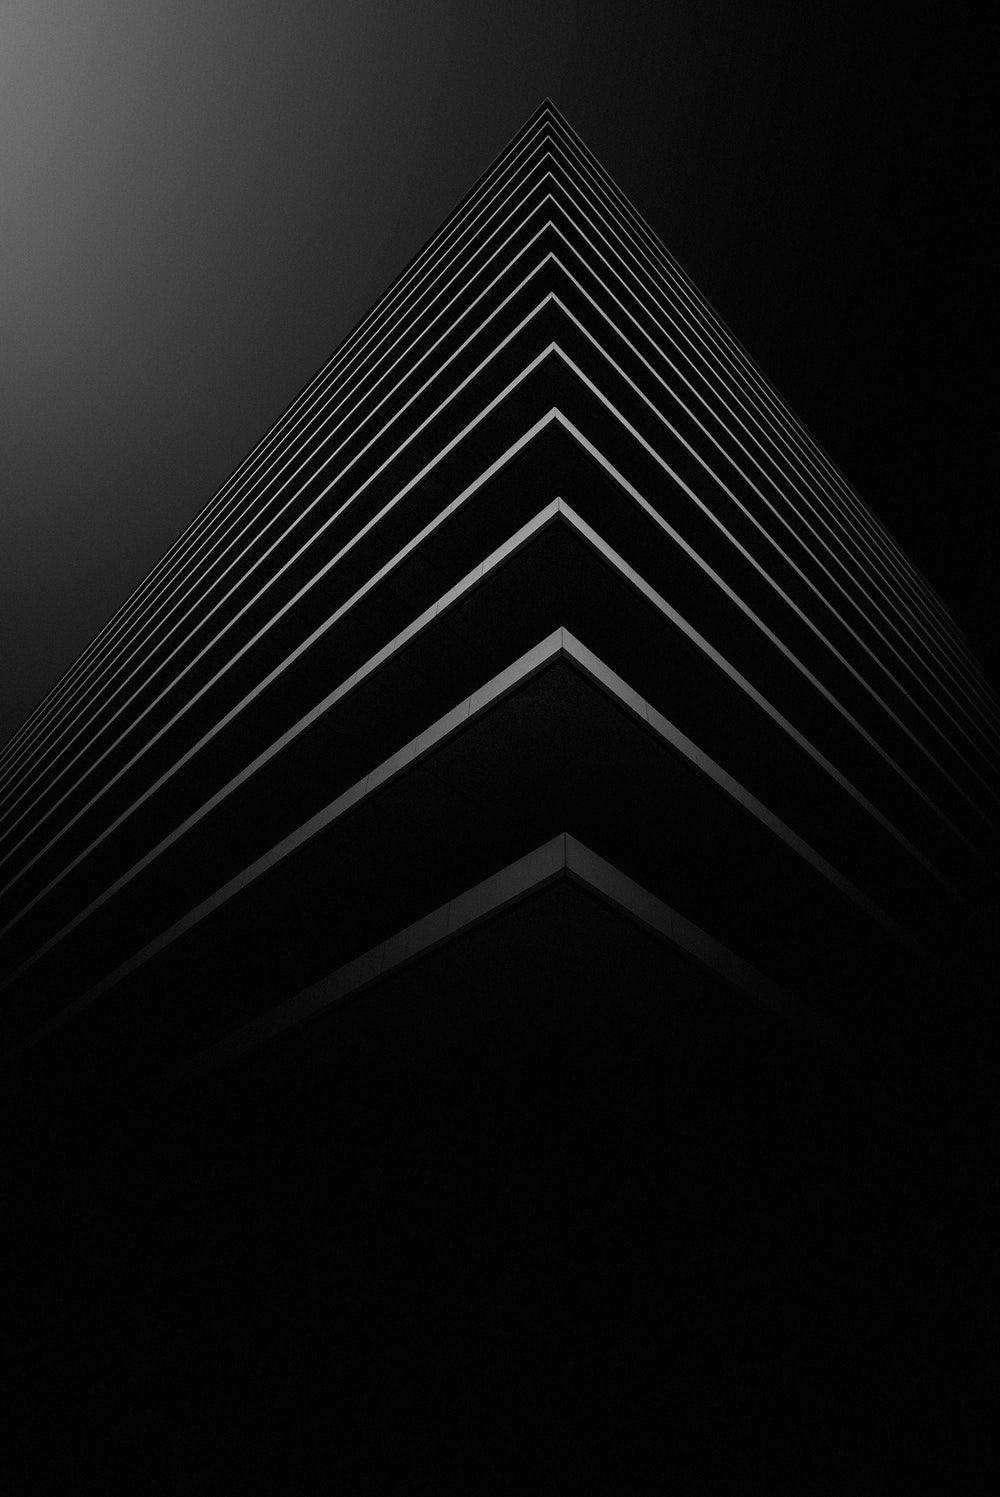 Black and White Triangle Logo - Triangle Pictures [HD] | Download Free Images & Stock Photos on Unsplash